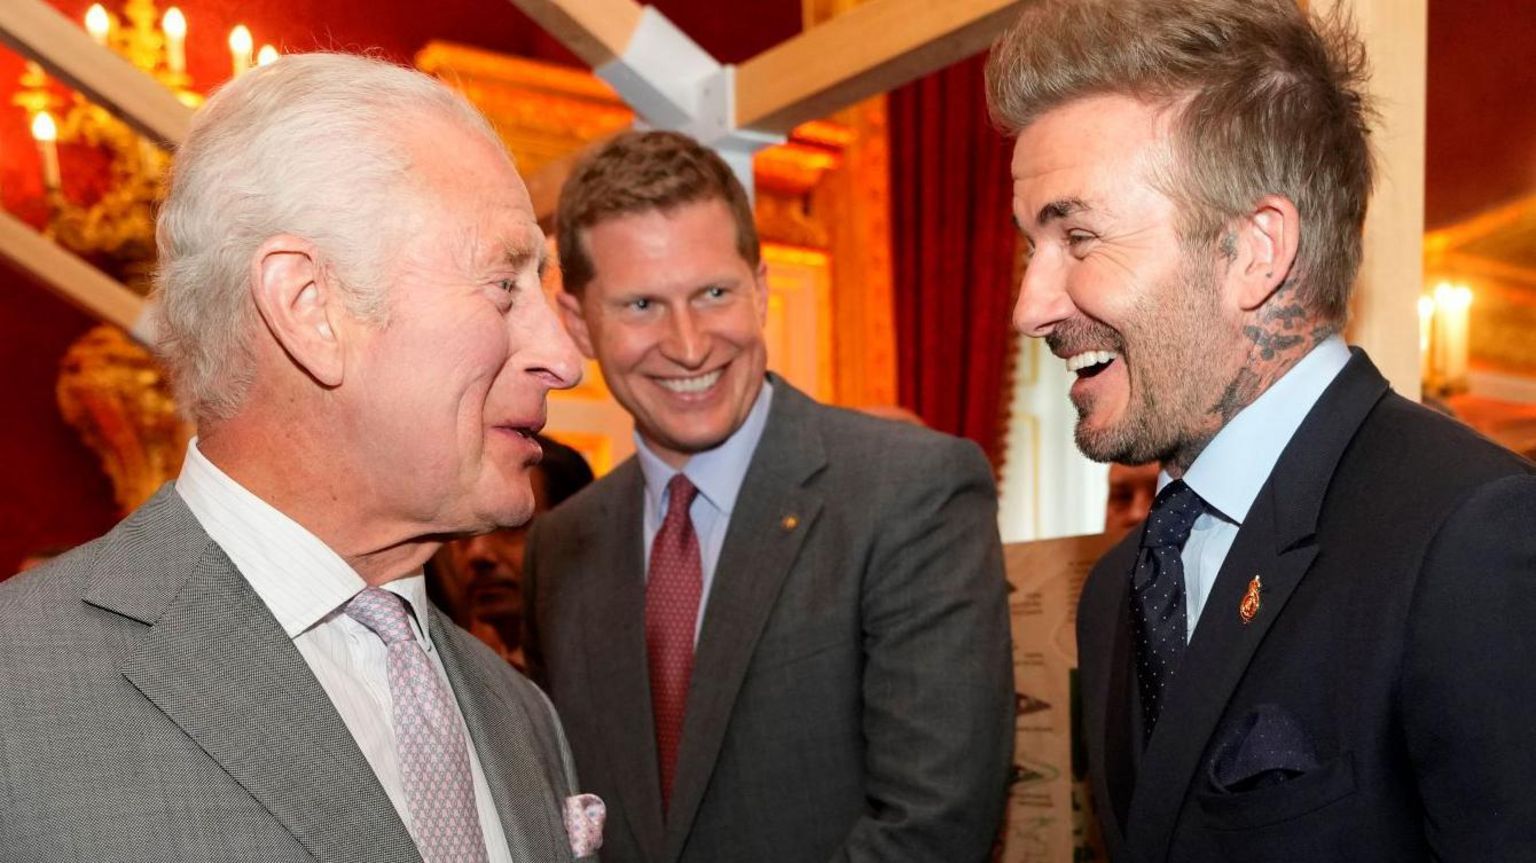 King Charles awards first 'harmony' prizes with David Beckham